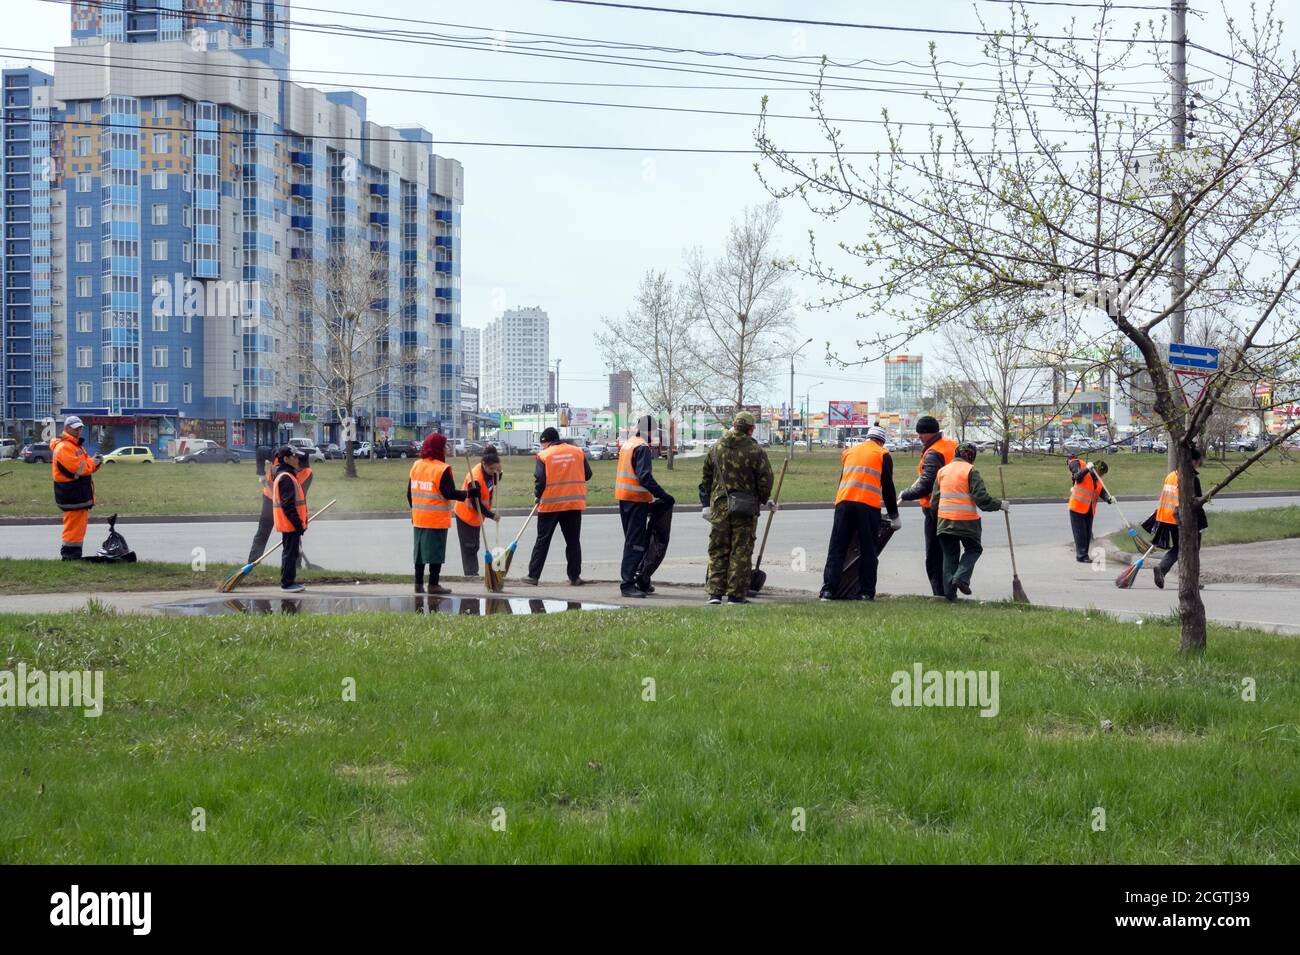 A group of cleaners of bright orange protective vests are sweeping the city sidewalk on a spring street in a residential area. Stock Photo